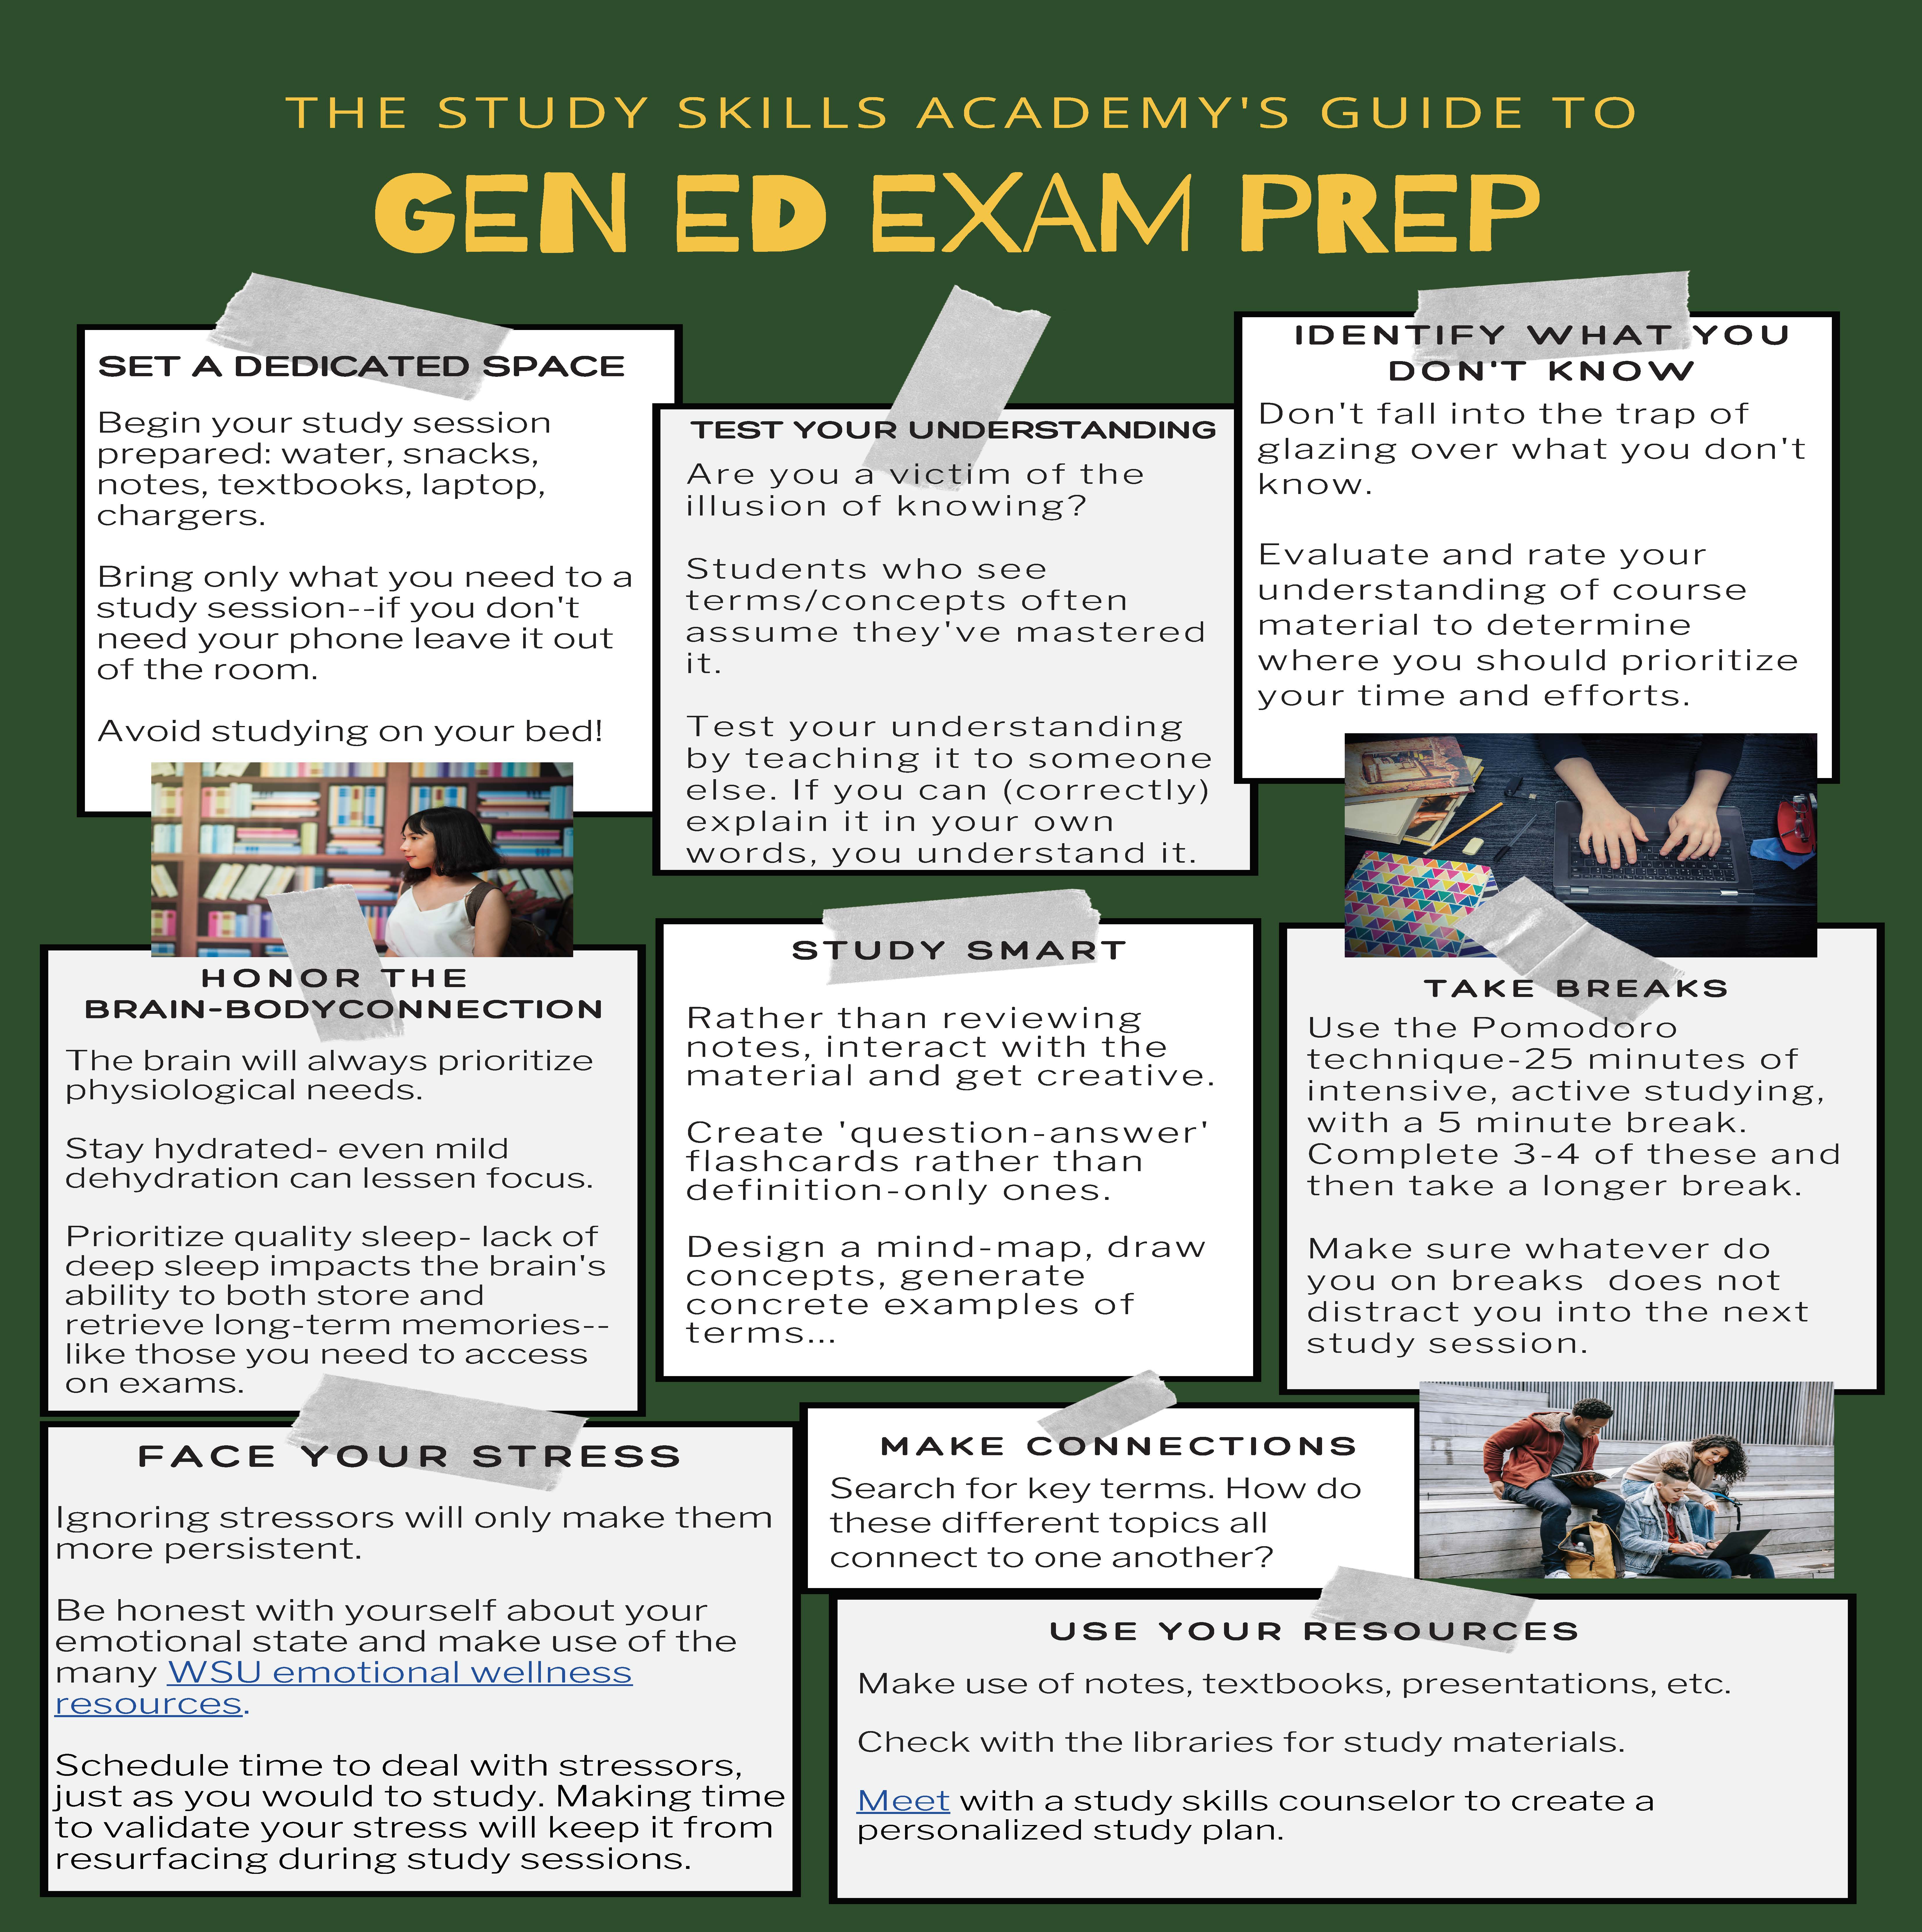 The study skills academy's guide to gen ed exam prep - described in text